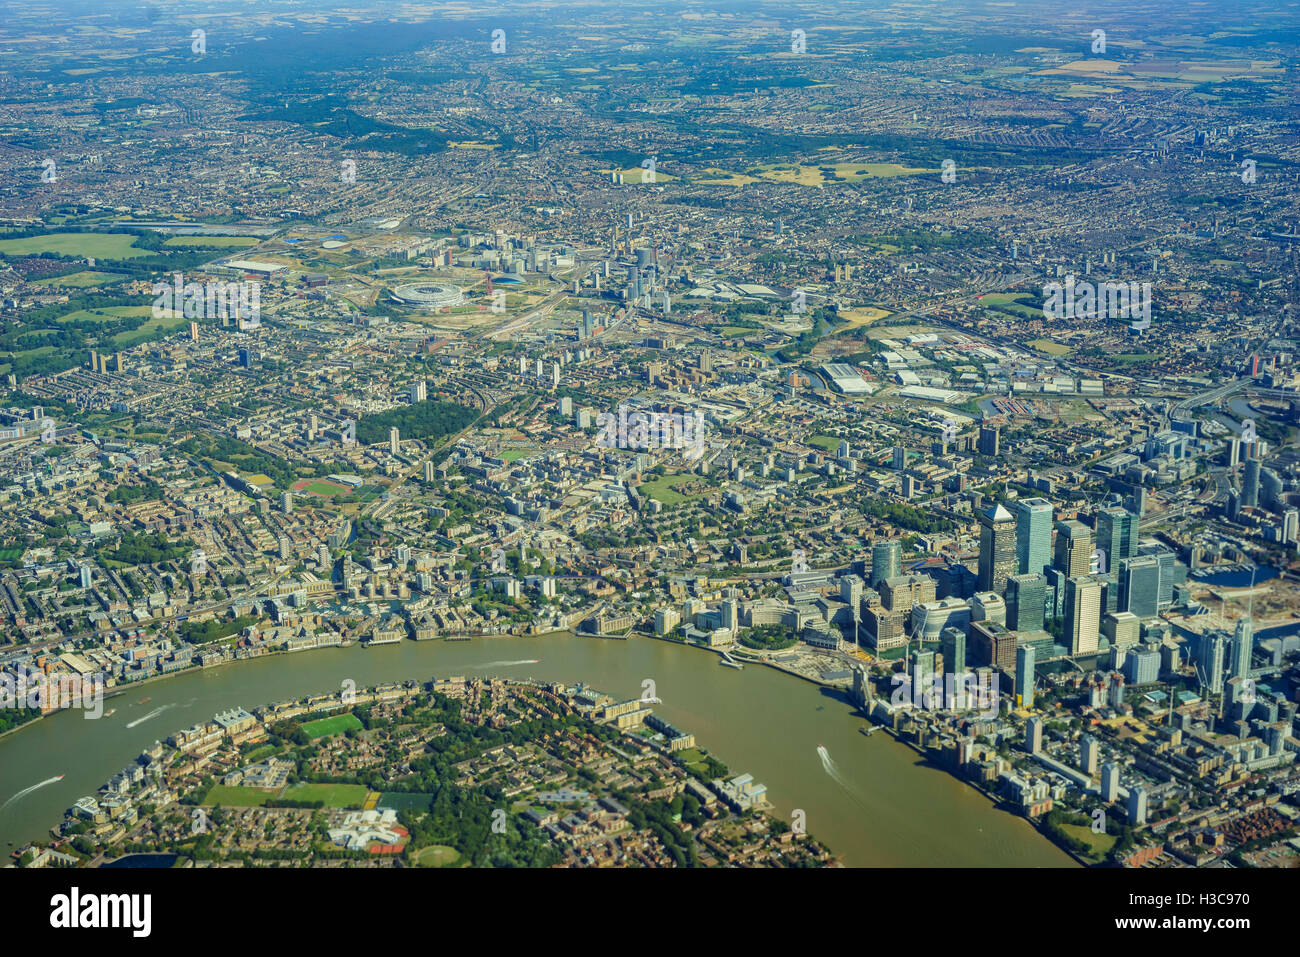 Aerial view of Beckton, Creekmouth, Royal Arsenal, Thamesmead West, Polthorne Estate, Plumstead of United Kingdom Stock Photo